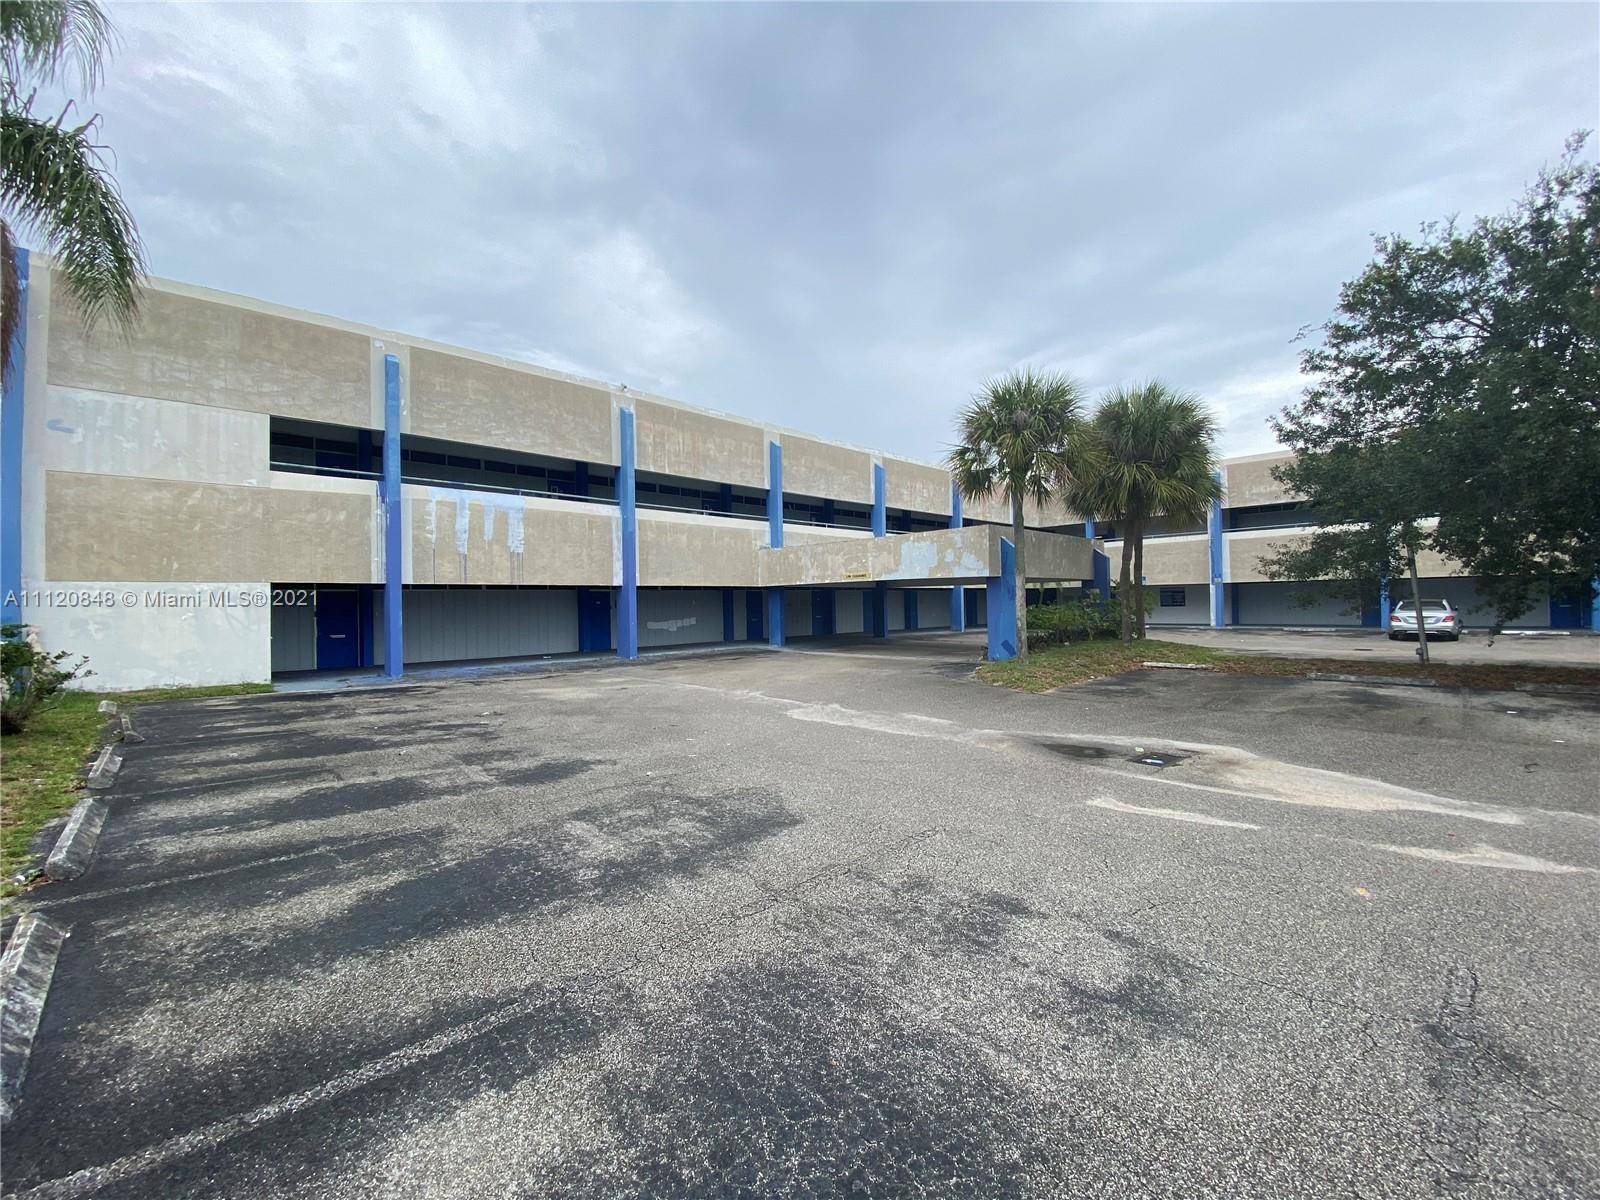 Excellent units for lease in desirable Plantation, FL.